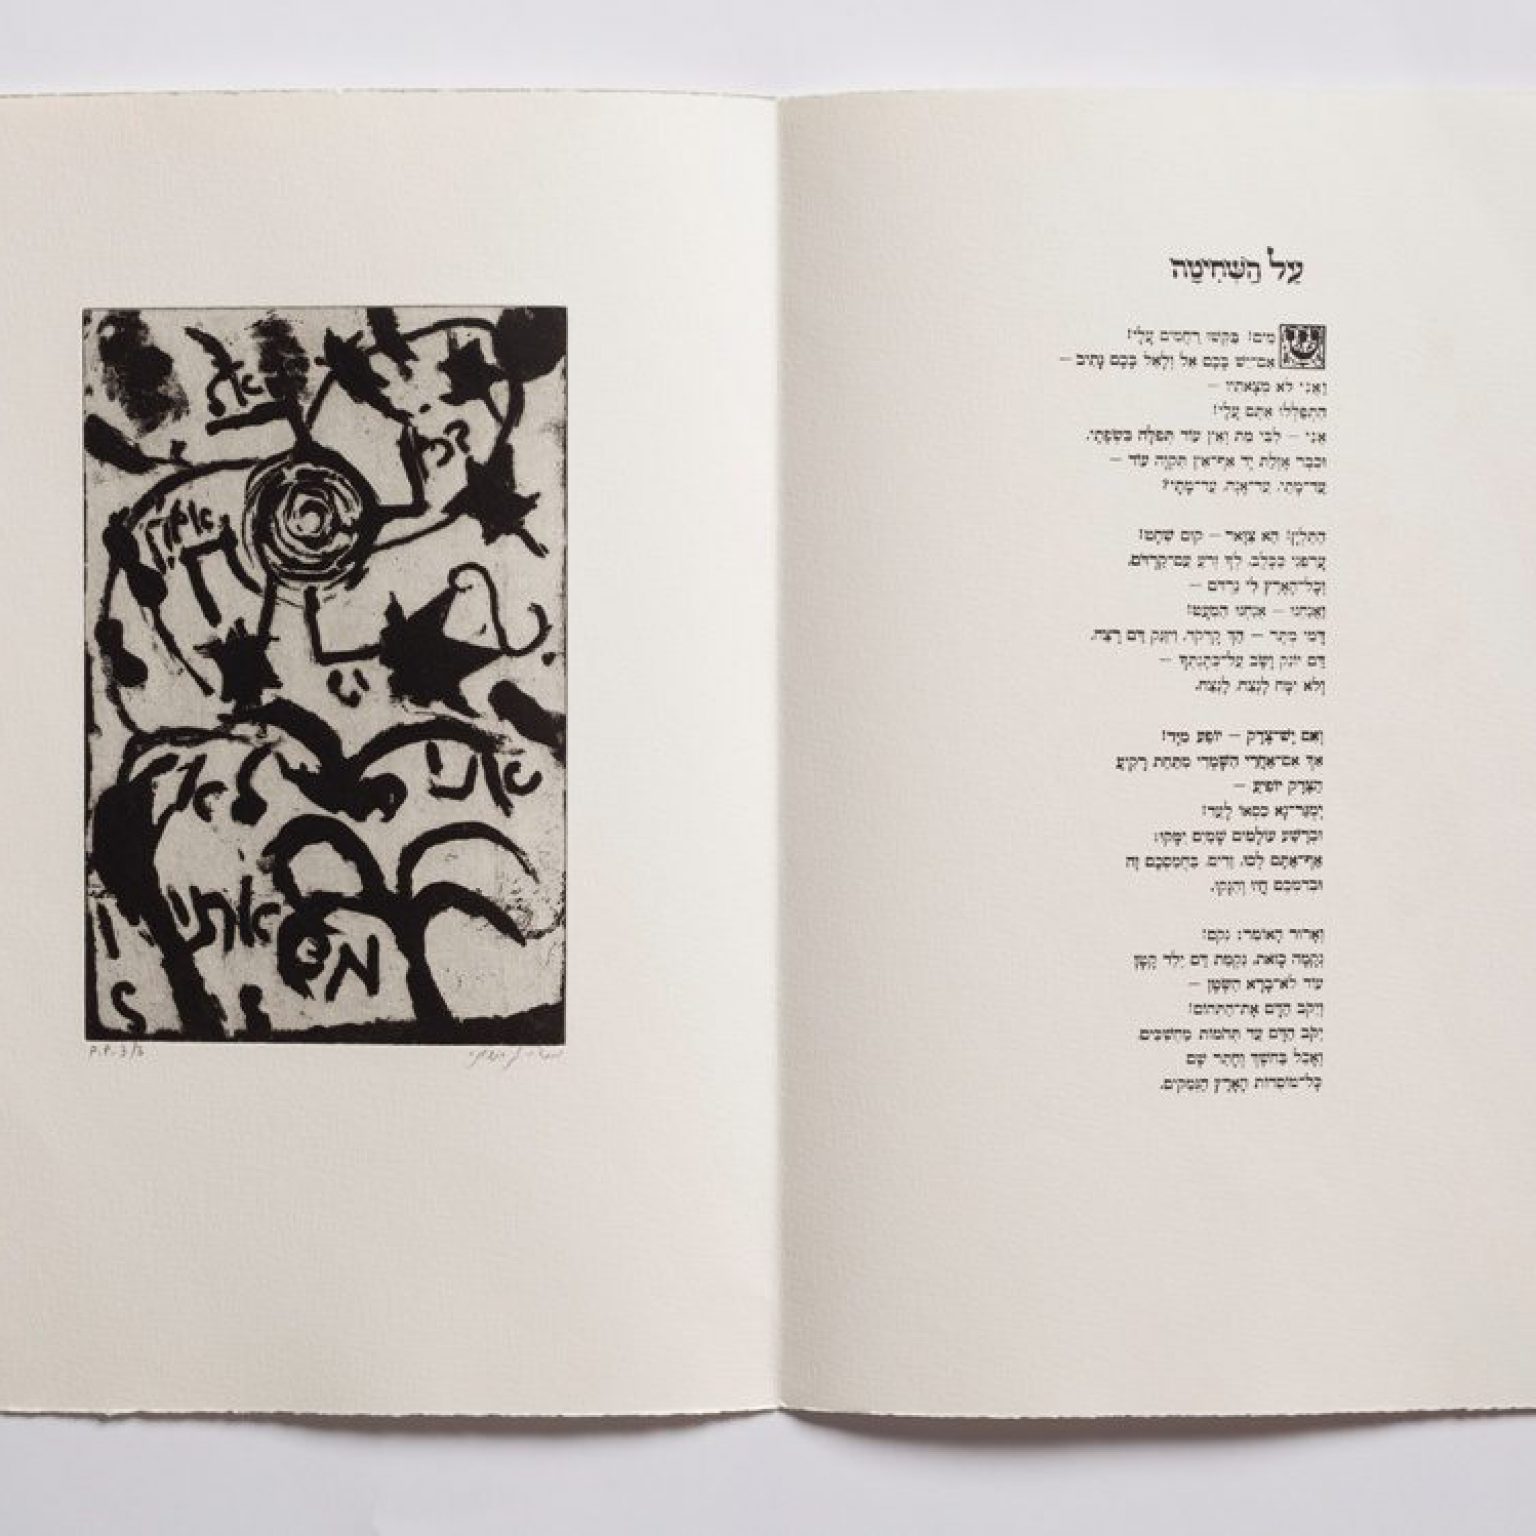 From 13 Etching For Poems By H. N. Bialik, 1987
13 prints (etching, aquatint, dry-point, soft-ground, electric pencil and suger-lift) for 13 poems by H. N. Bialik in screenprint, Printed on Arches paper (240 gram), housed in a cardboard box, Page size: 26.5 x 37 cm (each), Edition: 50